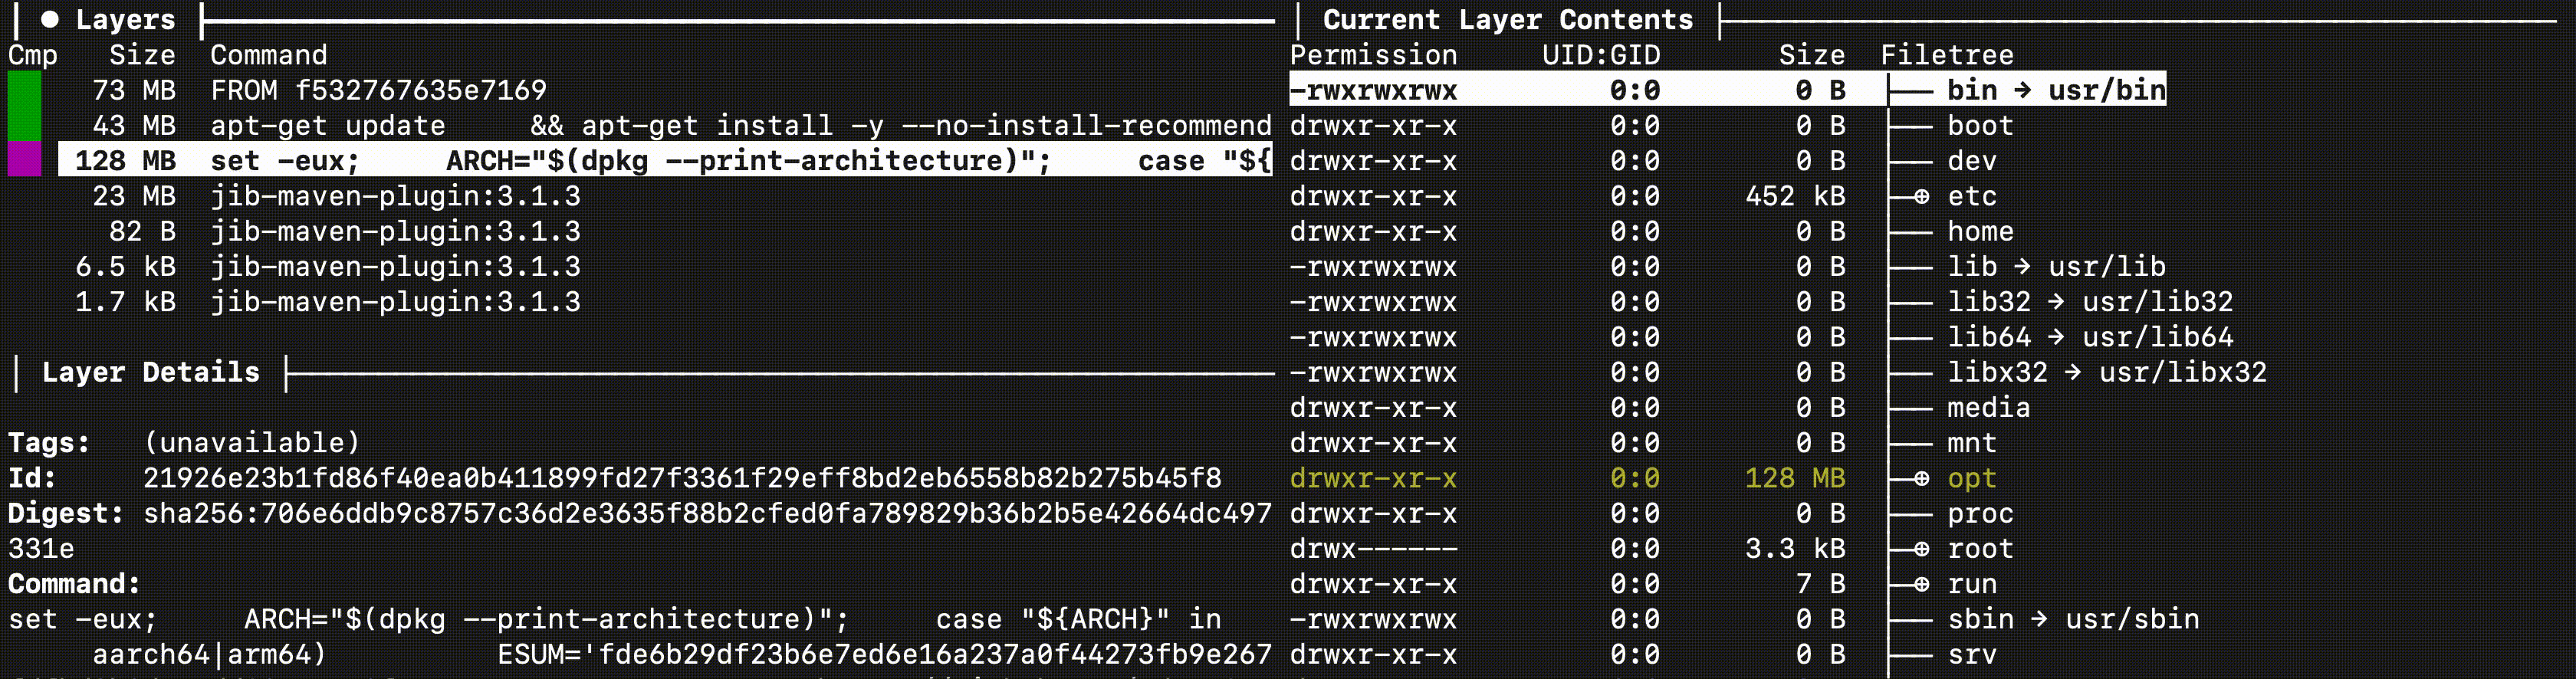 A animated screenshot of a part of the output from the dive-command. The animation cycles through the top four of the seven image layers showing the contents being added in the respective layer. It shows that the fourth layer has a size of 23 MB and that it adds the app/libs folder. The fifth layer has a size of 82 Bytes and adds the app/resources folder. The sixth layer has a size of 6.5 kB, adding the app/classes folder. The seventh layer has a size of one 1.7 kB adding two jib-specific files.